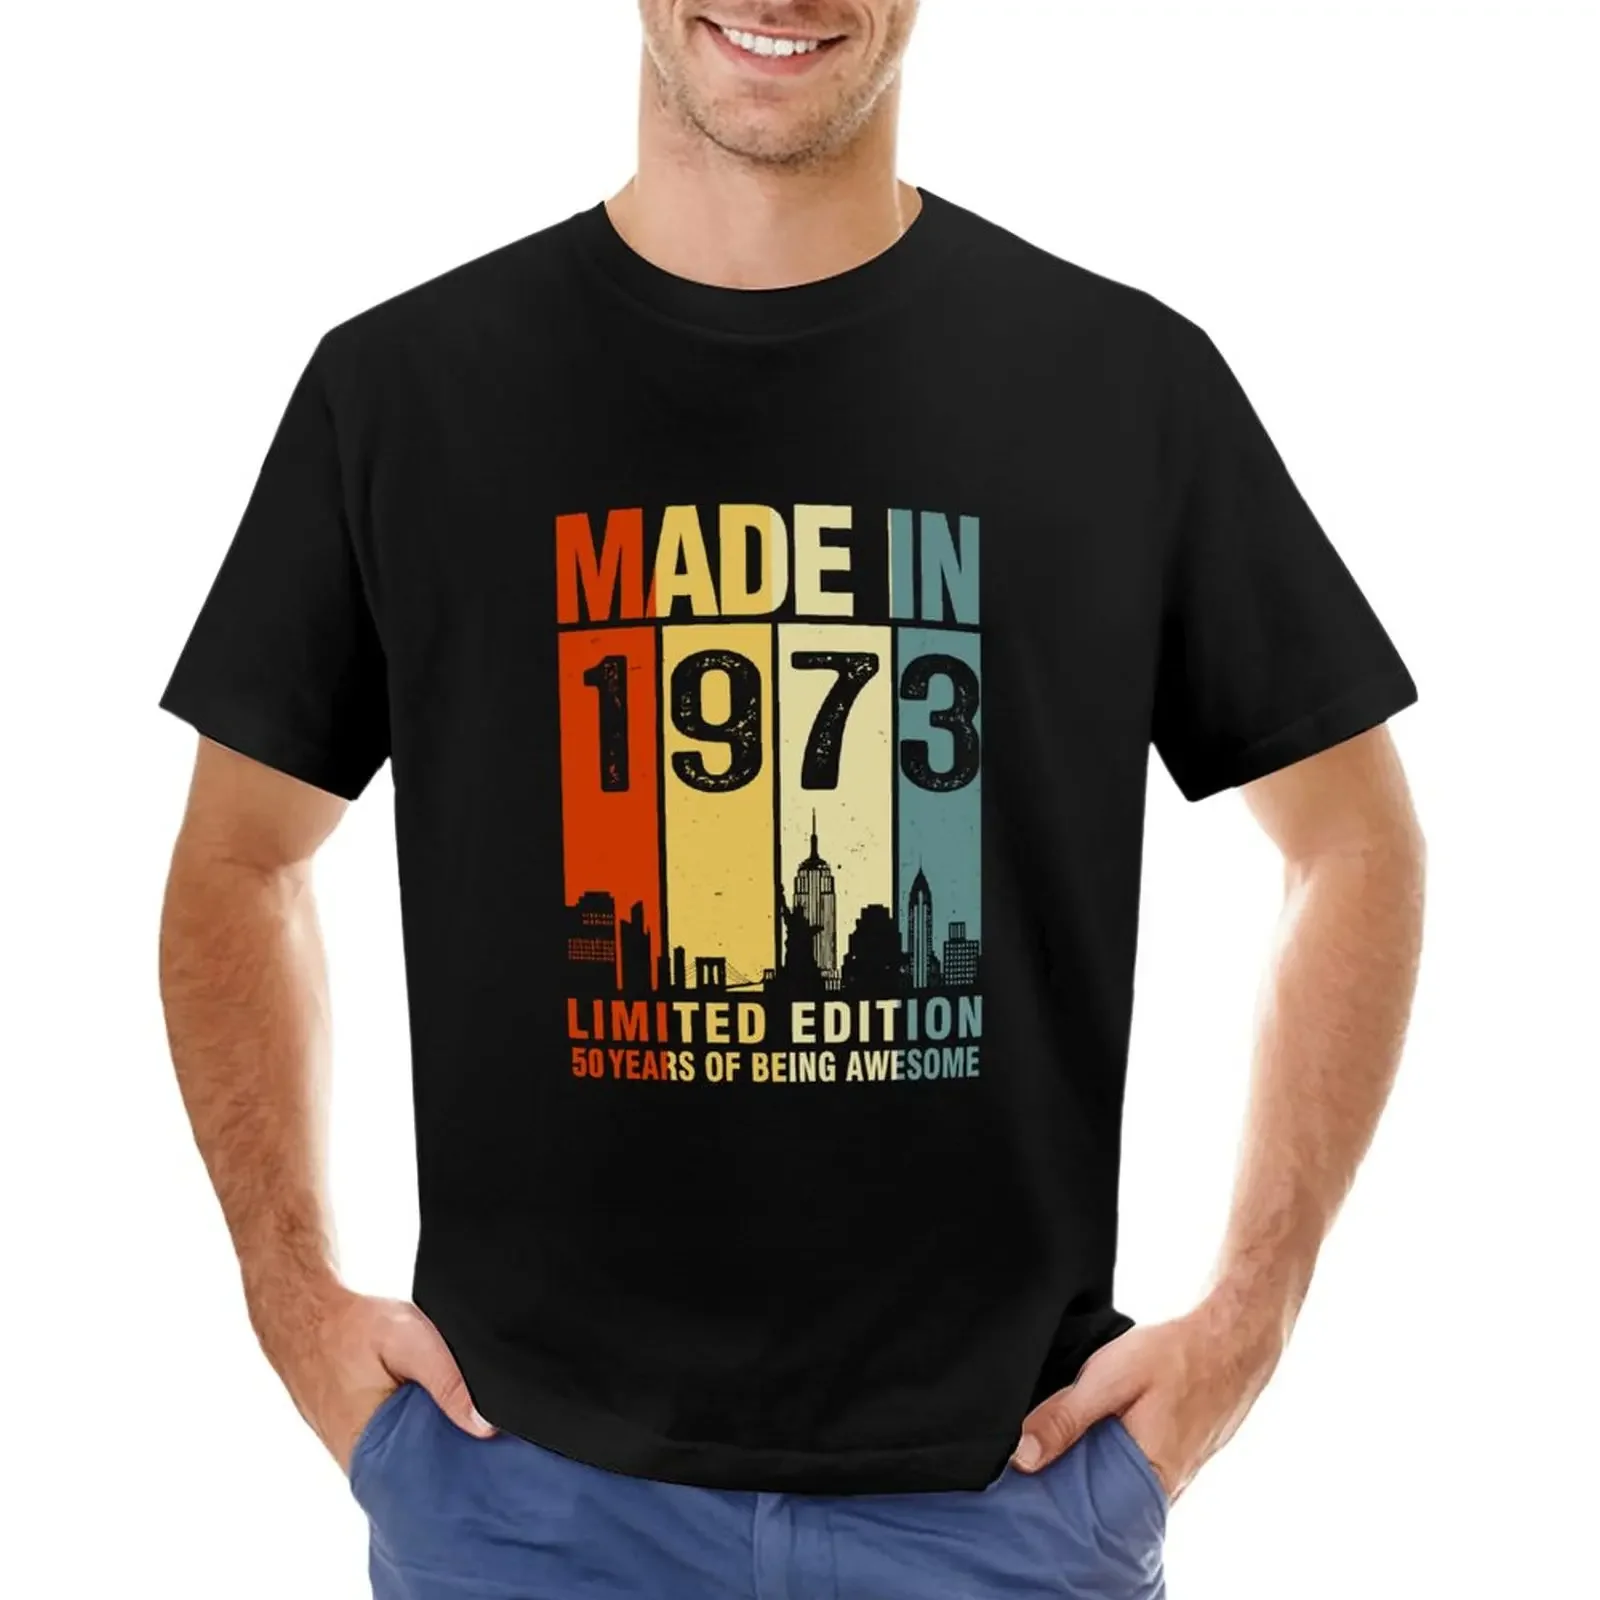 

Made In 1973 Limited Edition 50 Years Of Being Awesome T-Shirt quick drying shirt boys t shirts Men's t-shirt